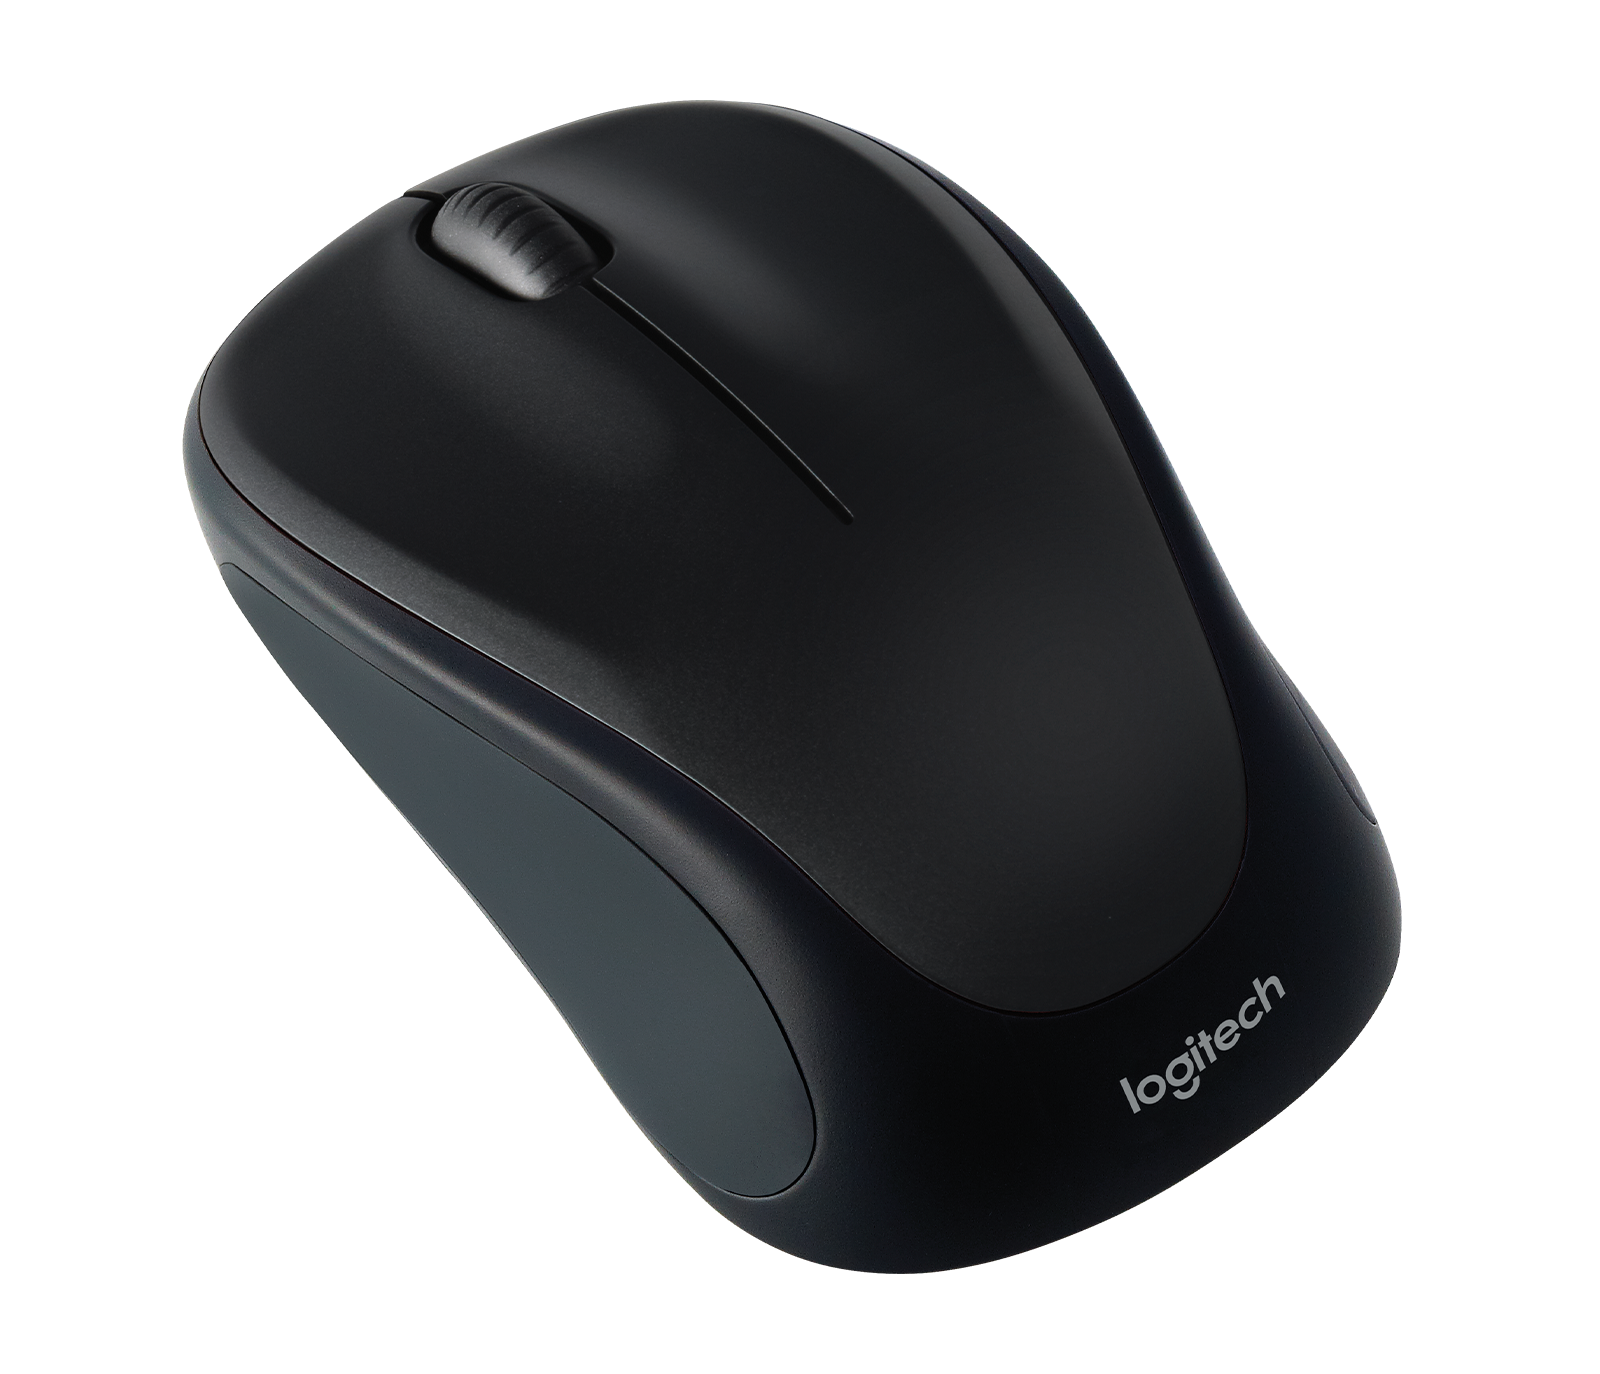 Image of Wireless Mouse M317 Compact with comfortable rubber sides - Black